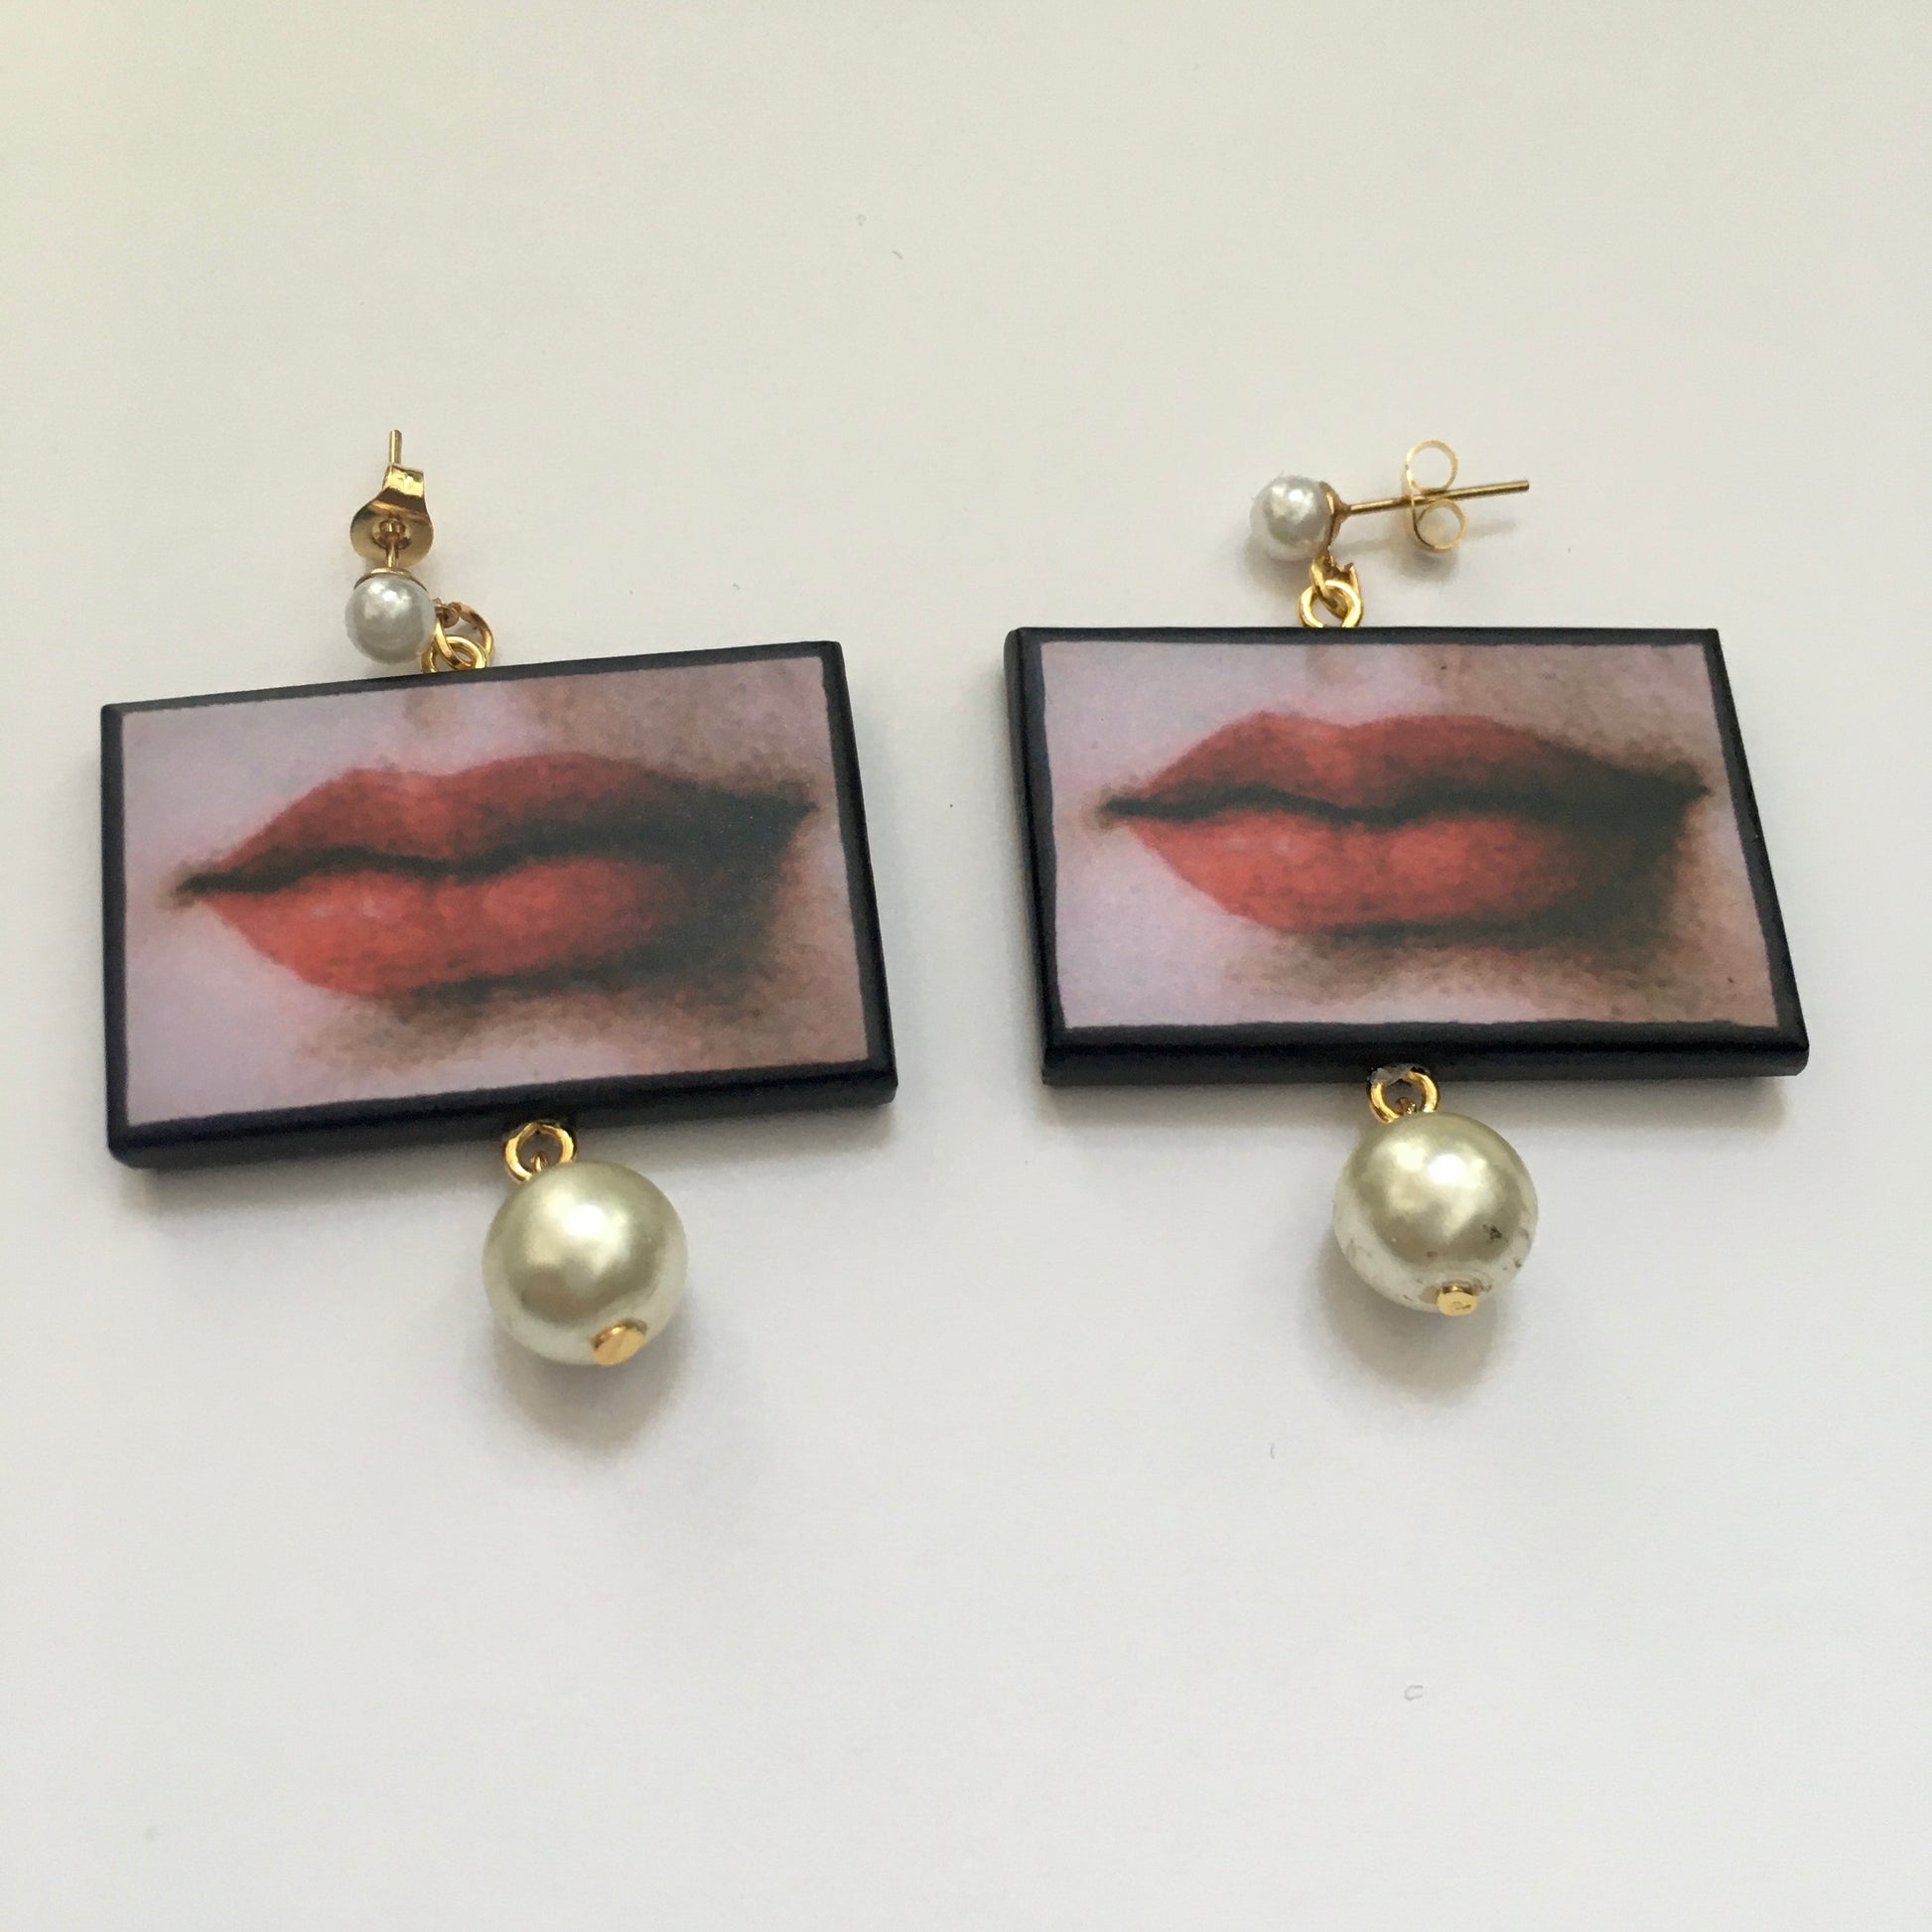 Stud pearls earrings with Lips art detail taken from an Agnolo Bronzino Mannerist painter.